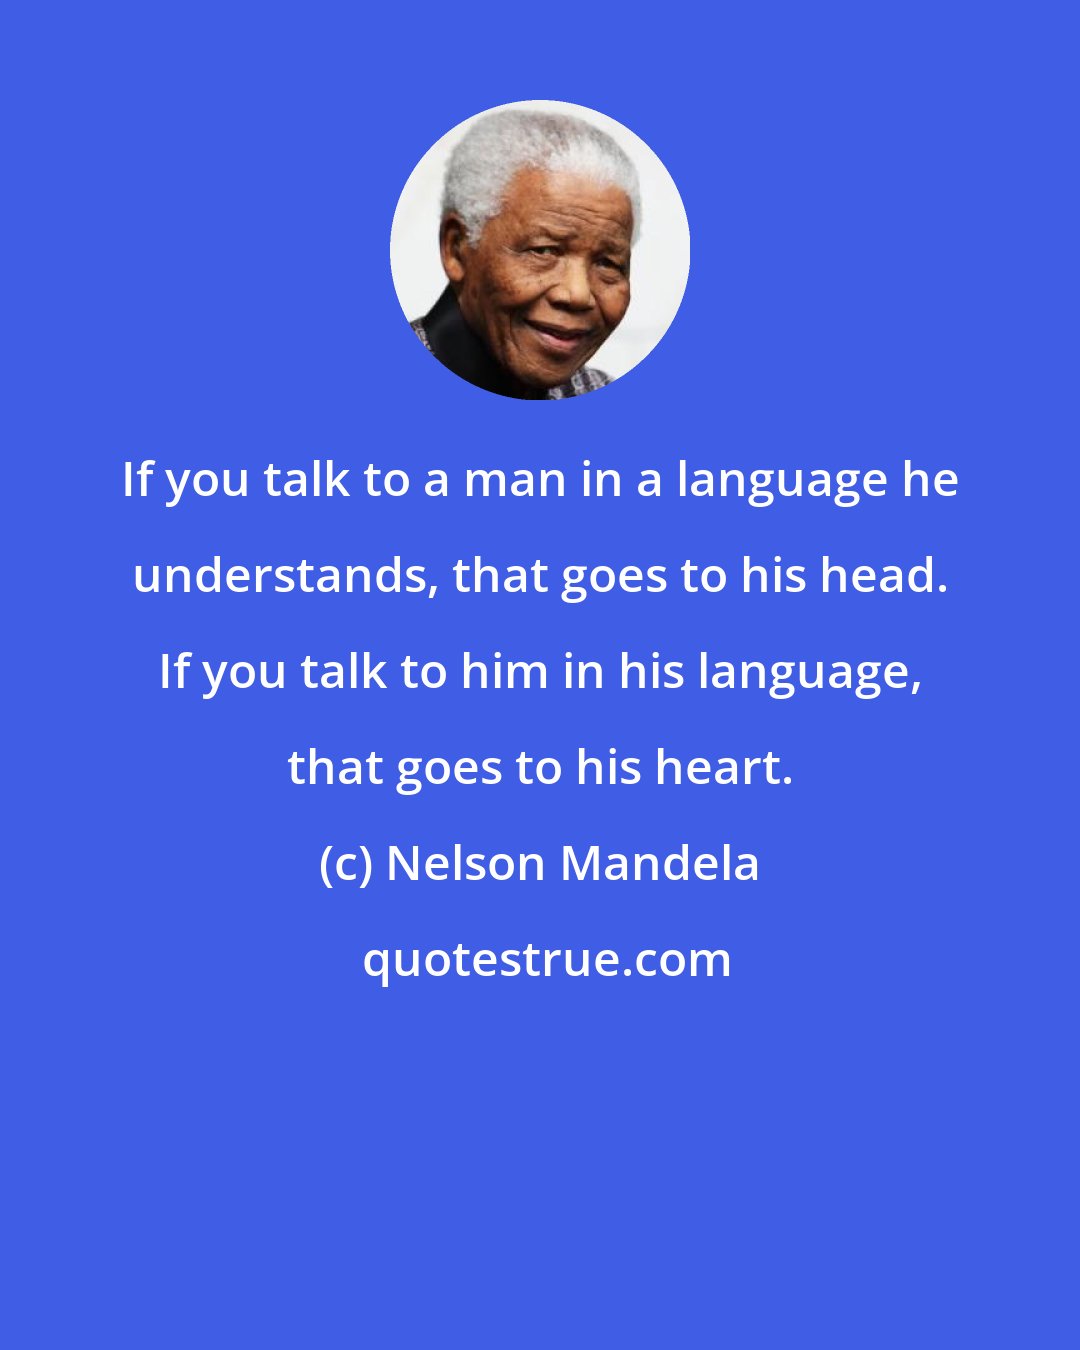 Nelson Mandela: If you talk to a man in a language he understands, that goes to his head. If you talk to him in his language, that goes to his heart.